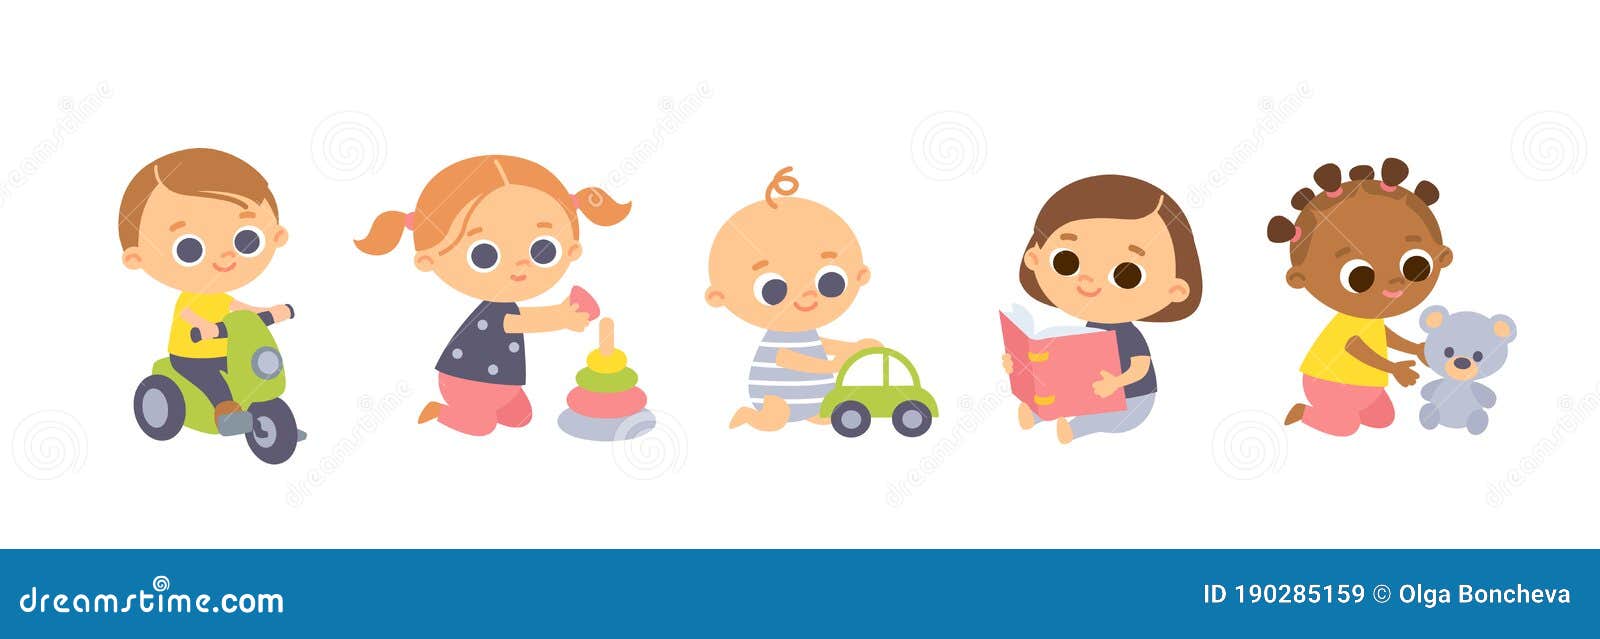 Little Boy Playing Toy Cars Stock Illustrations – 51 Little Boy Playing Toy  Cars Stock Illustrations, Vectors & Clipart - Dreamstime